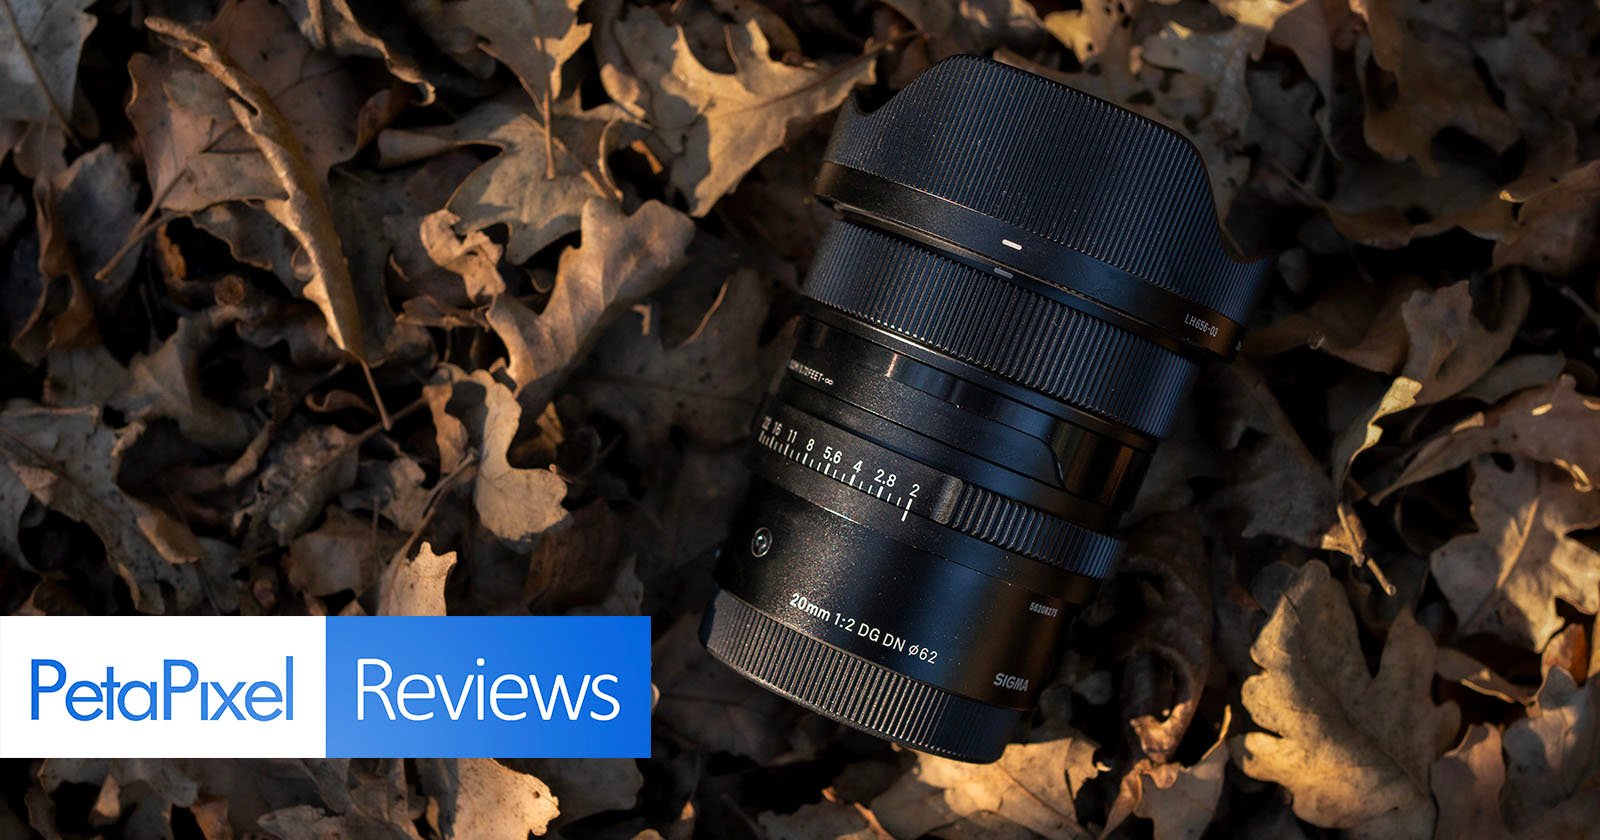 Sigma 20mm f2 DG DN review